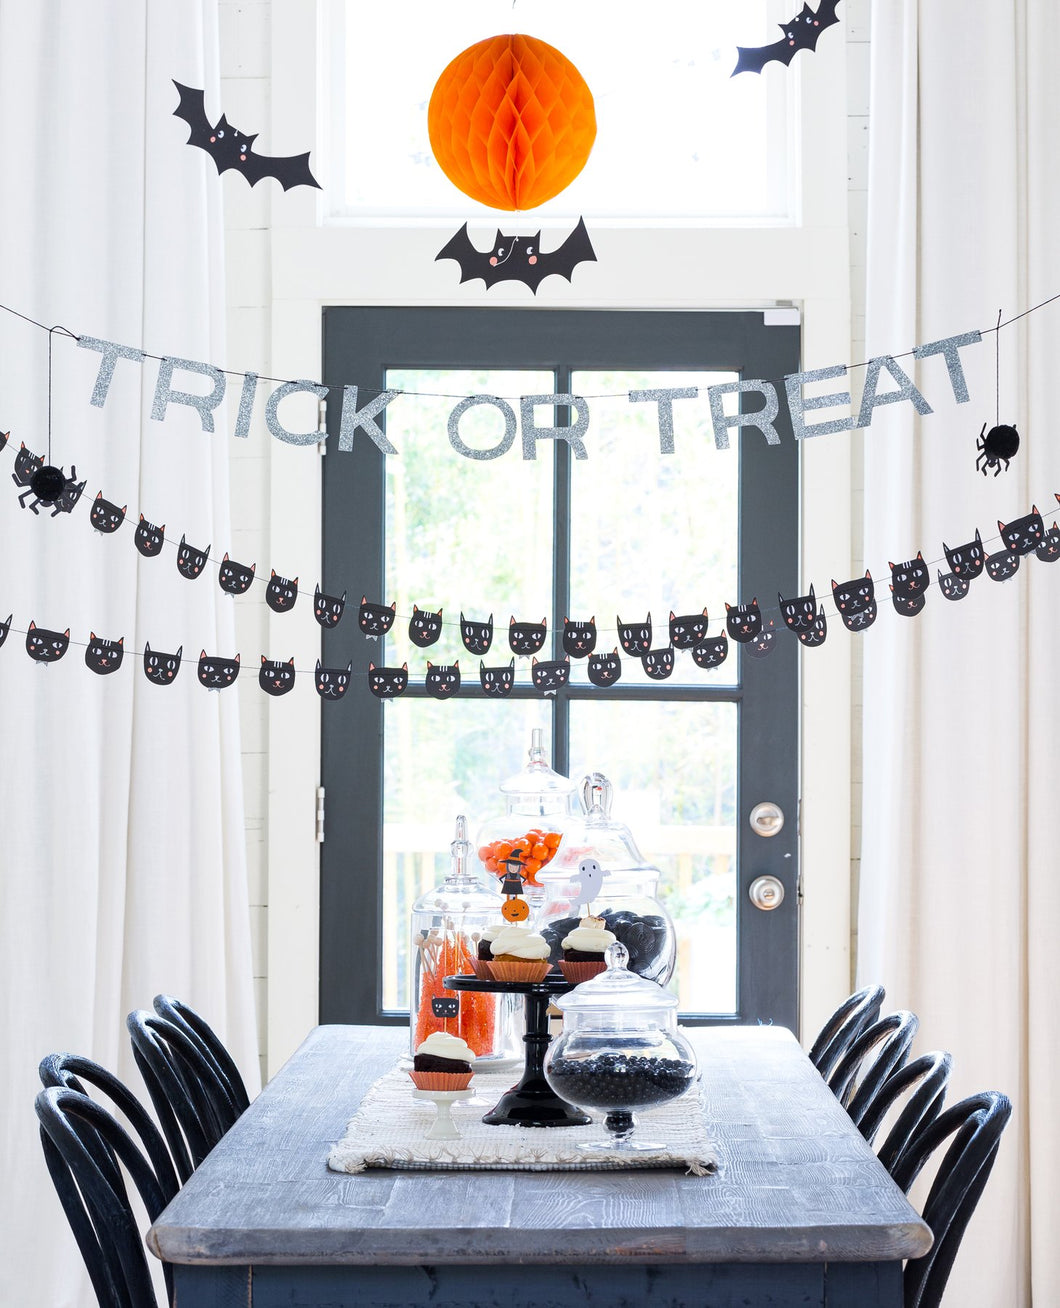 Trick or Treat Banner